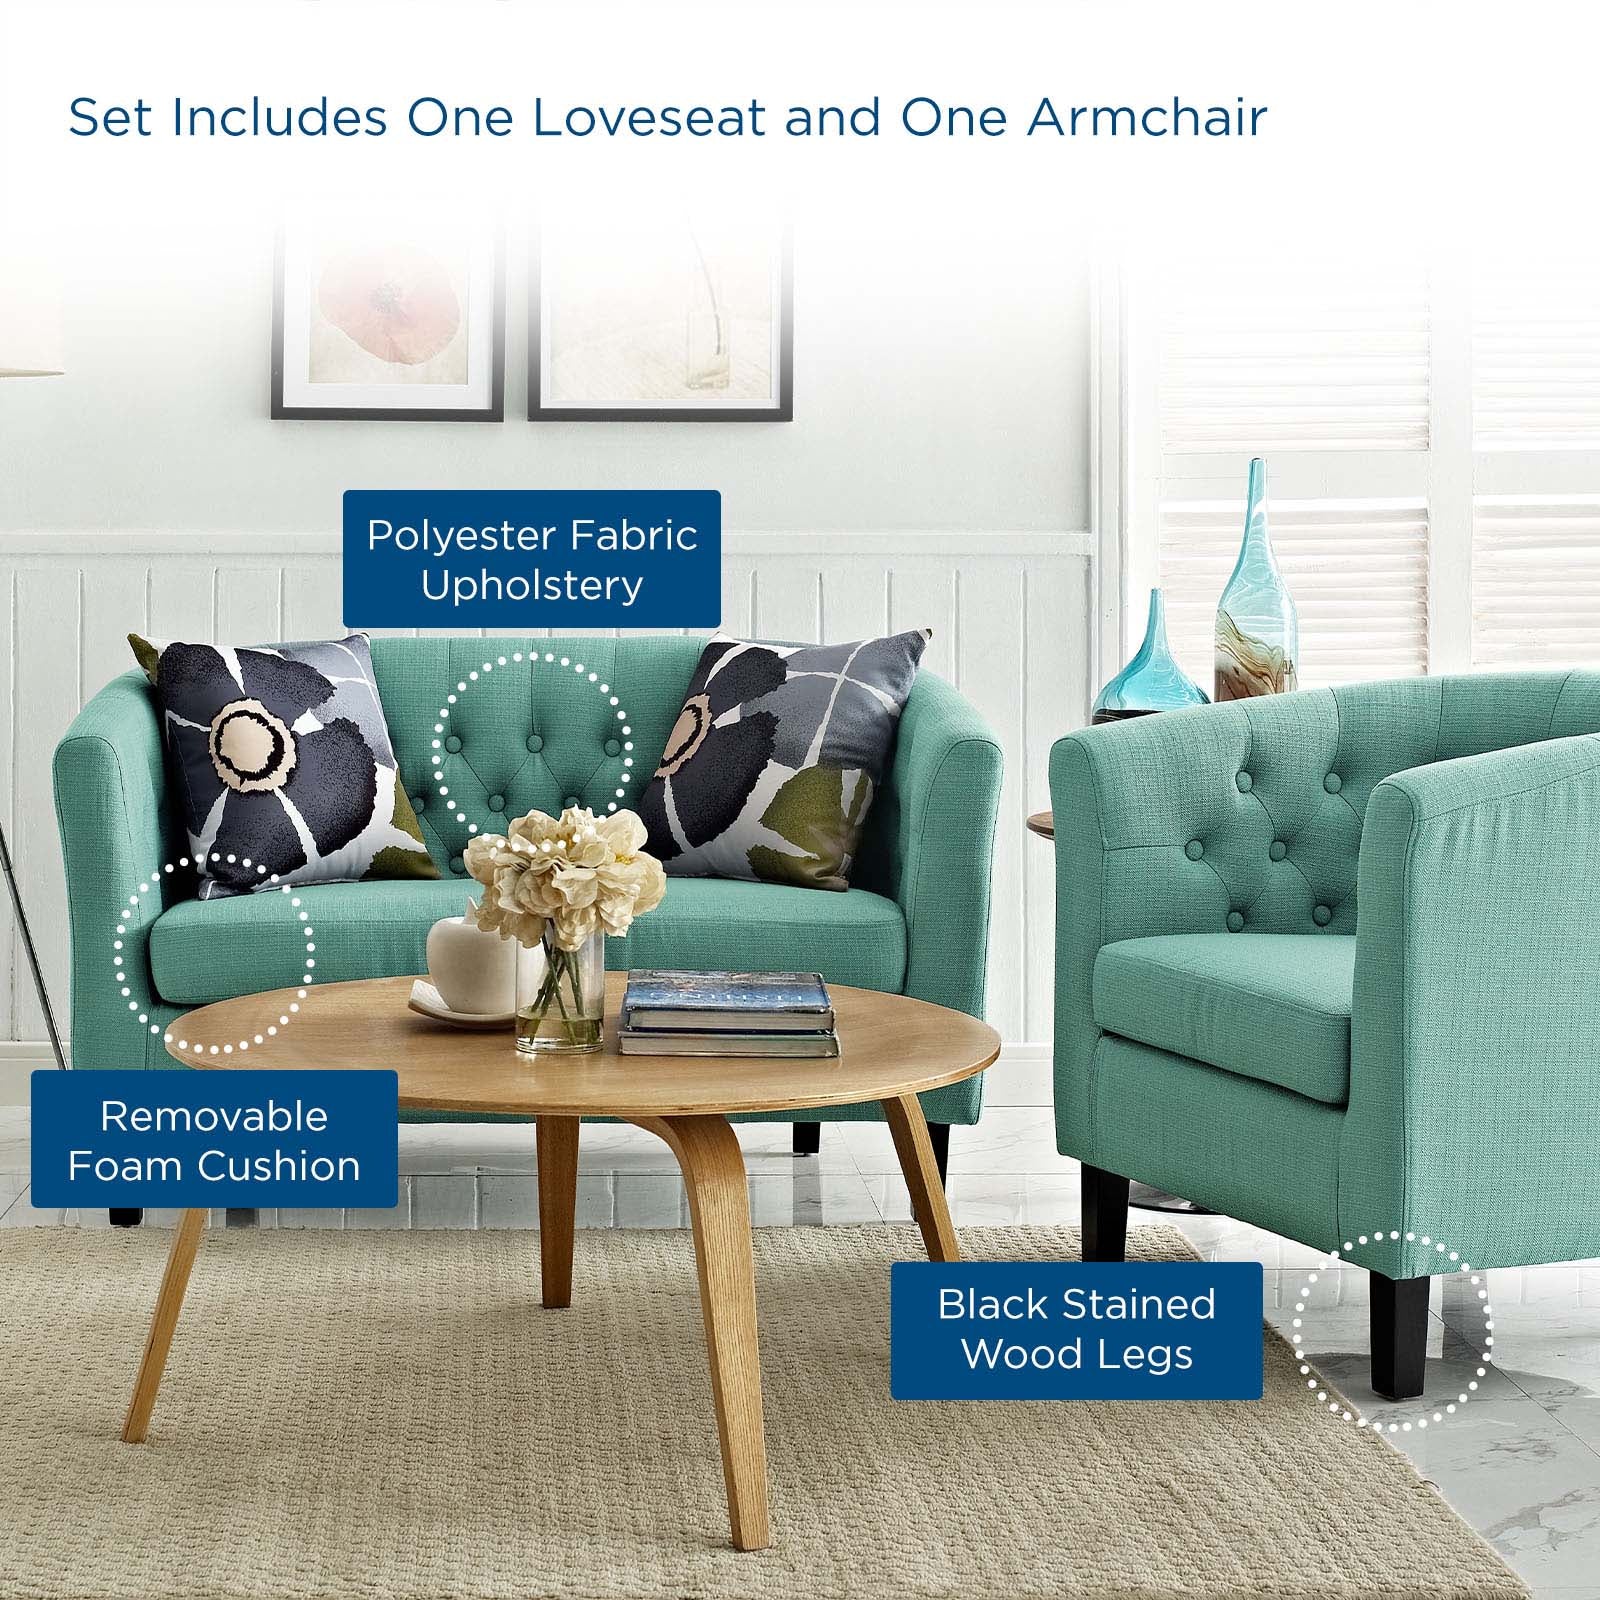 Modway Living Room Sets - Prospect 2 Piece Upholstered Fabric Loveseat and Armchair Set Laguna